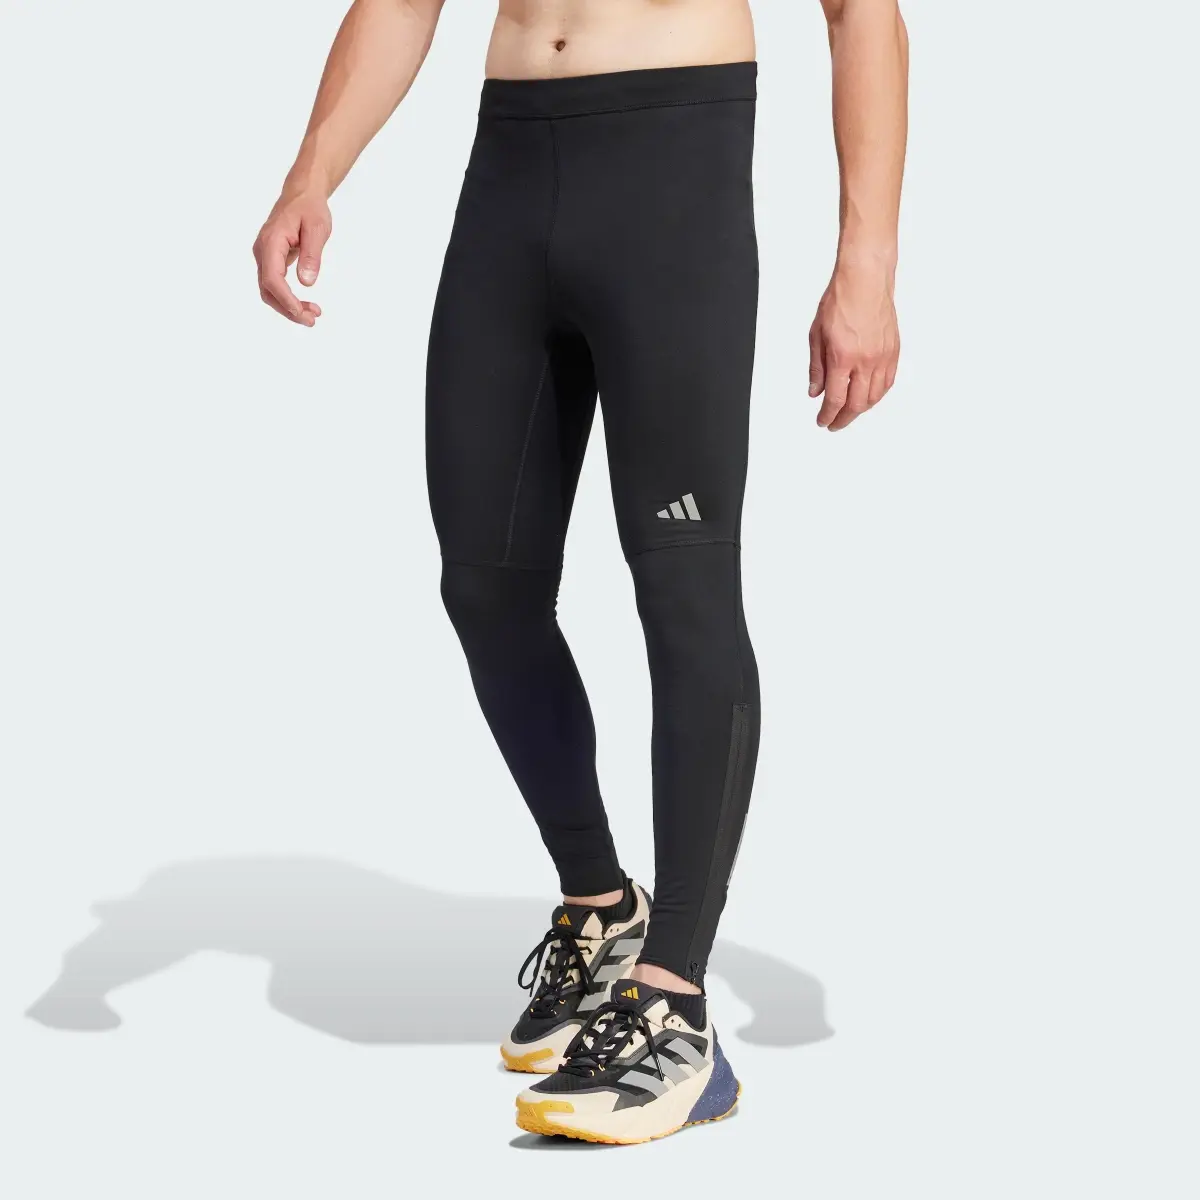 Adidas Ultimate Running Conquer the Elements AEROREADY Warming Leggings. 1